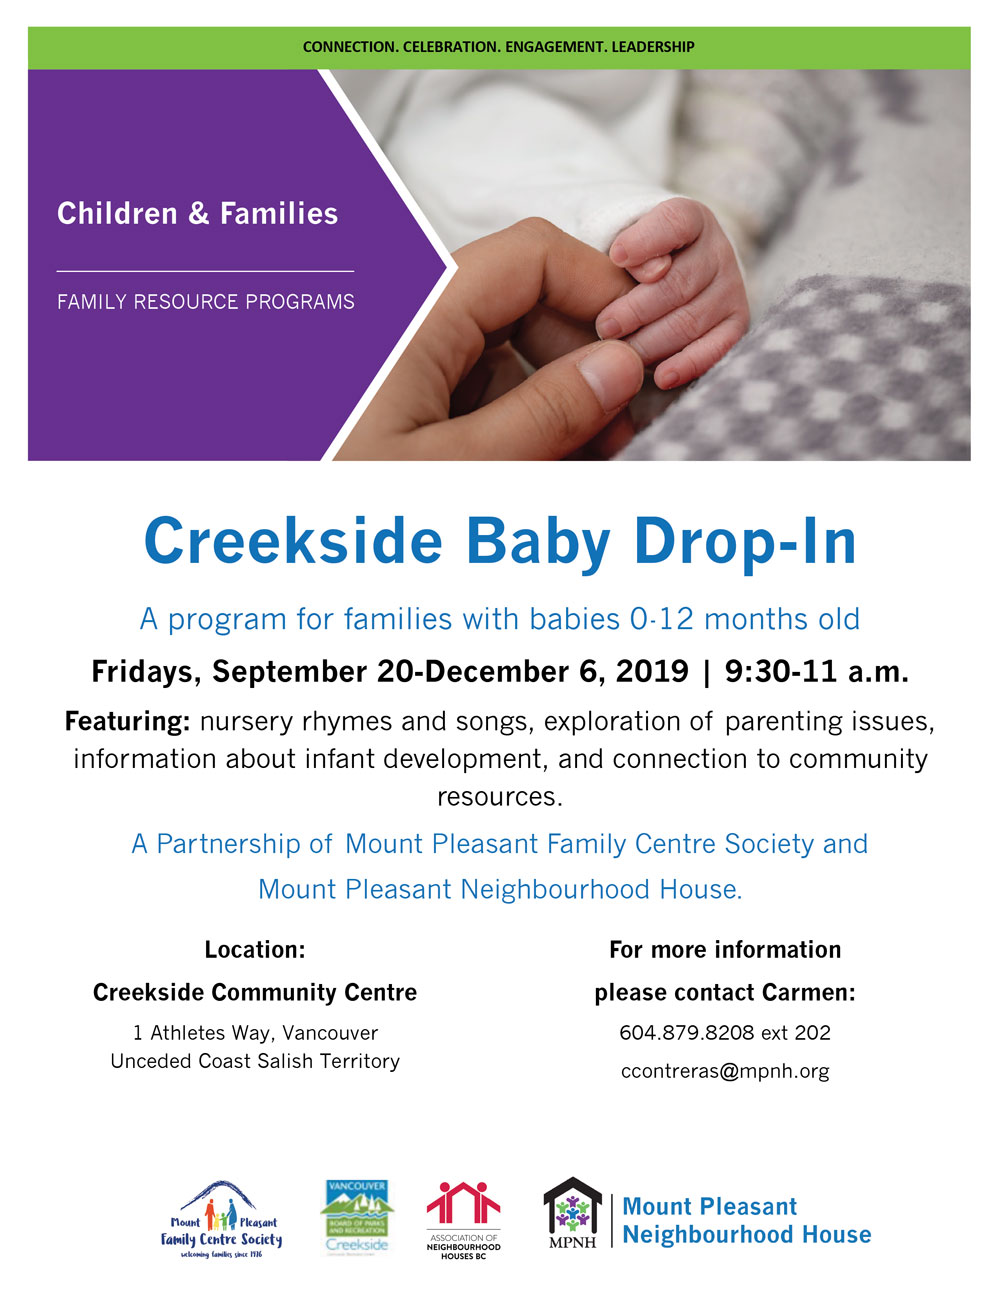 An image of the poster with program details, featuring a photo of an adult holding a baby's hand